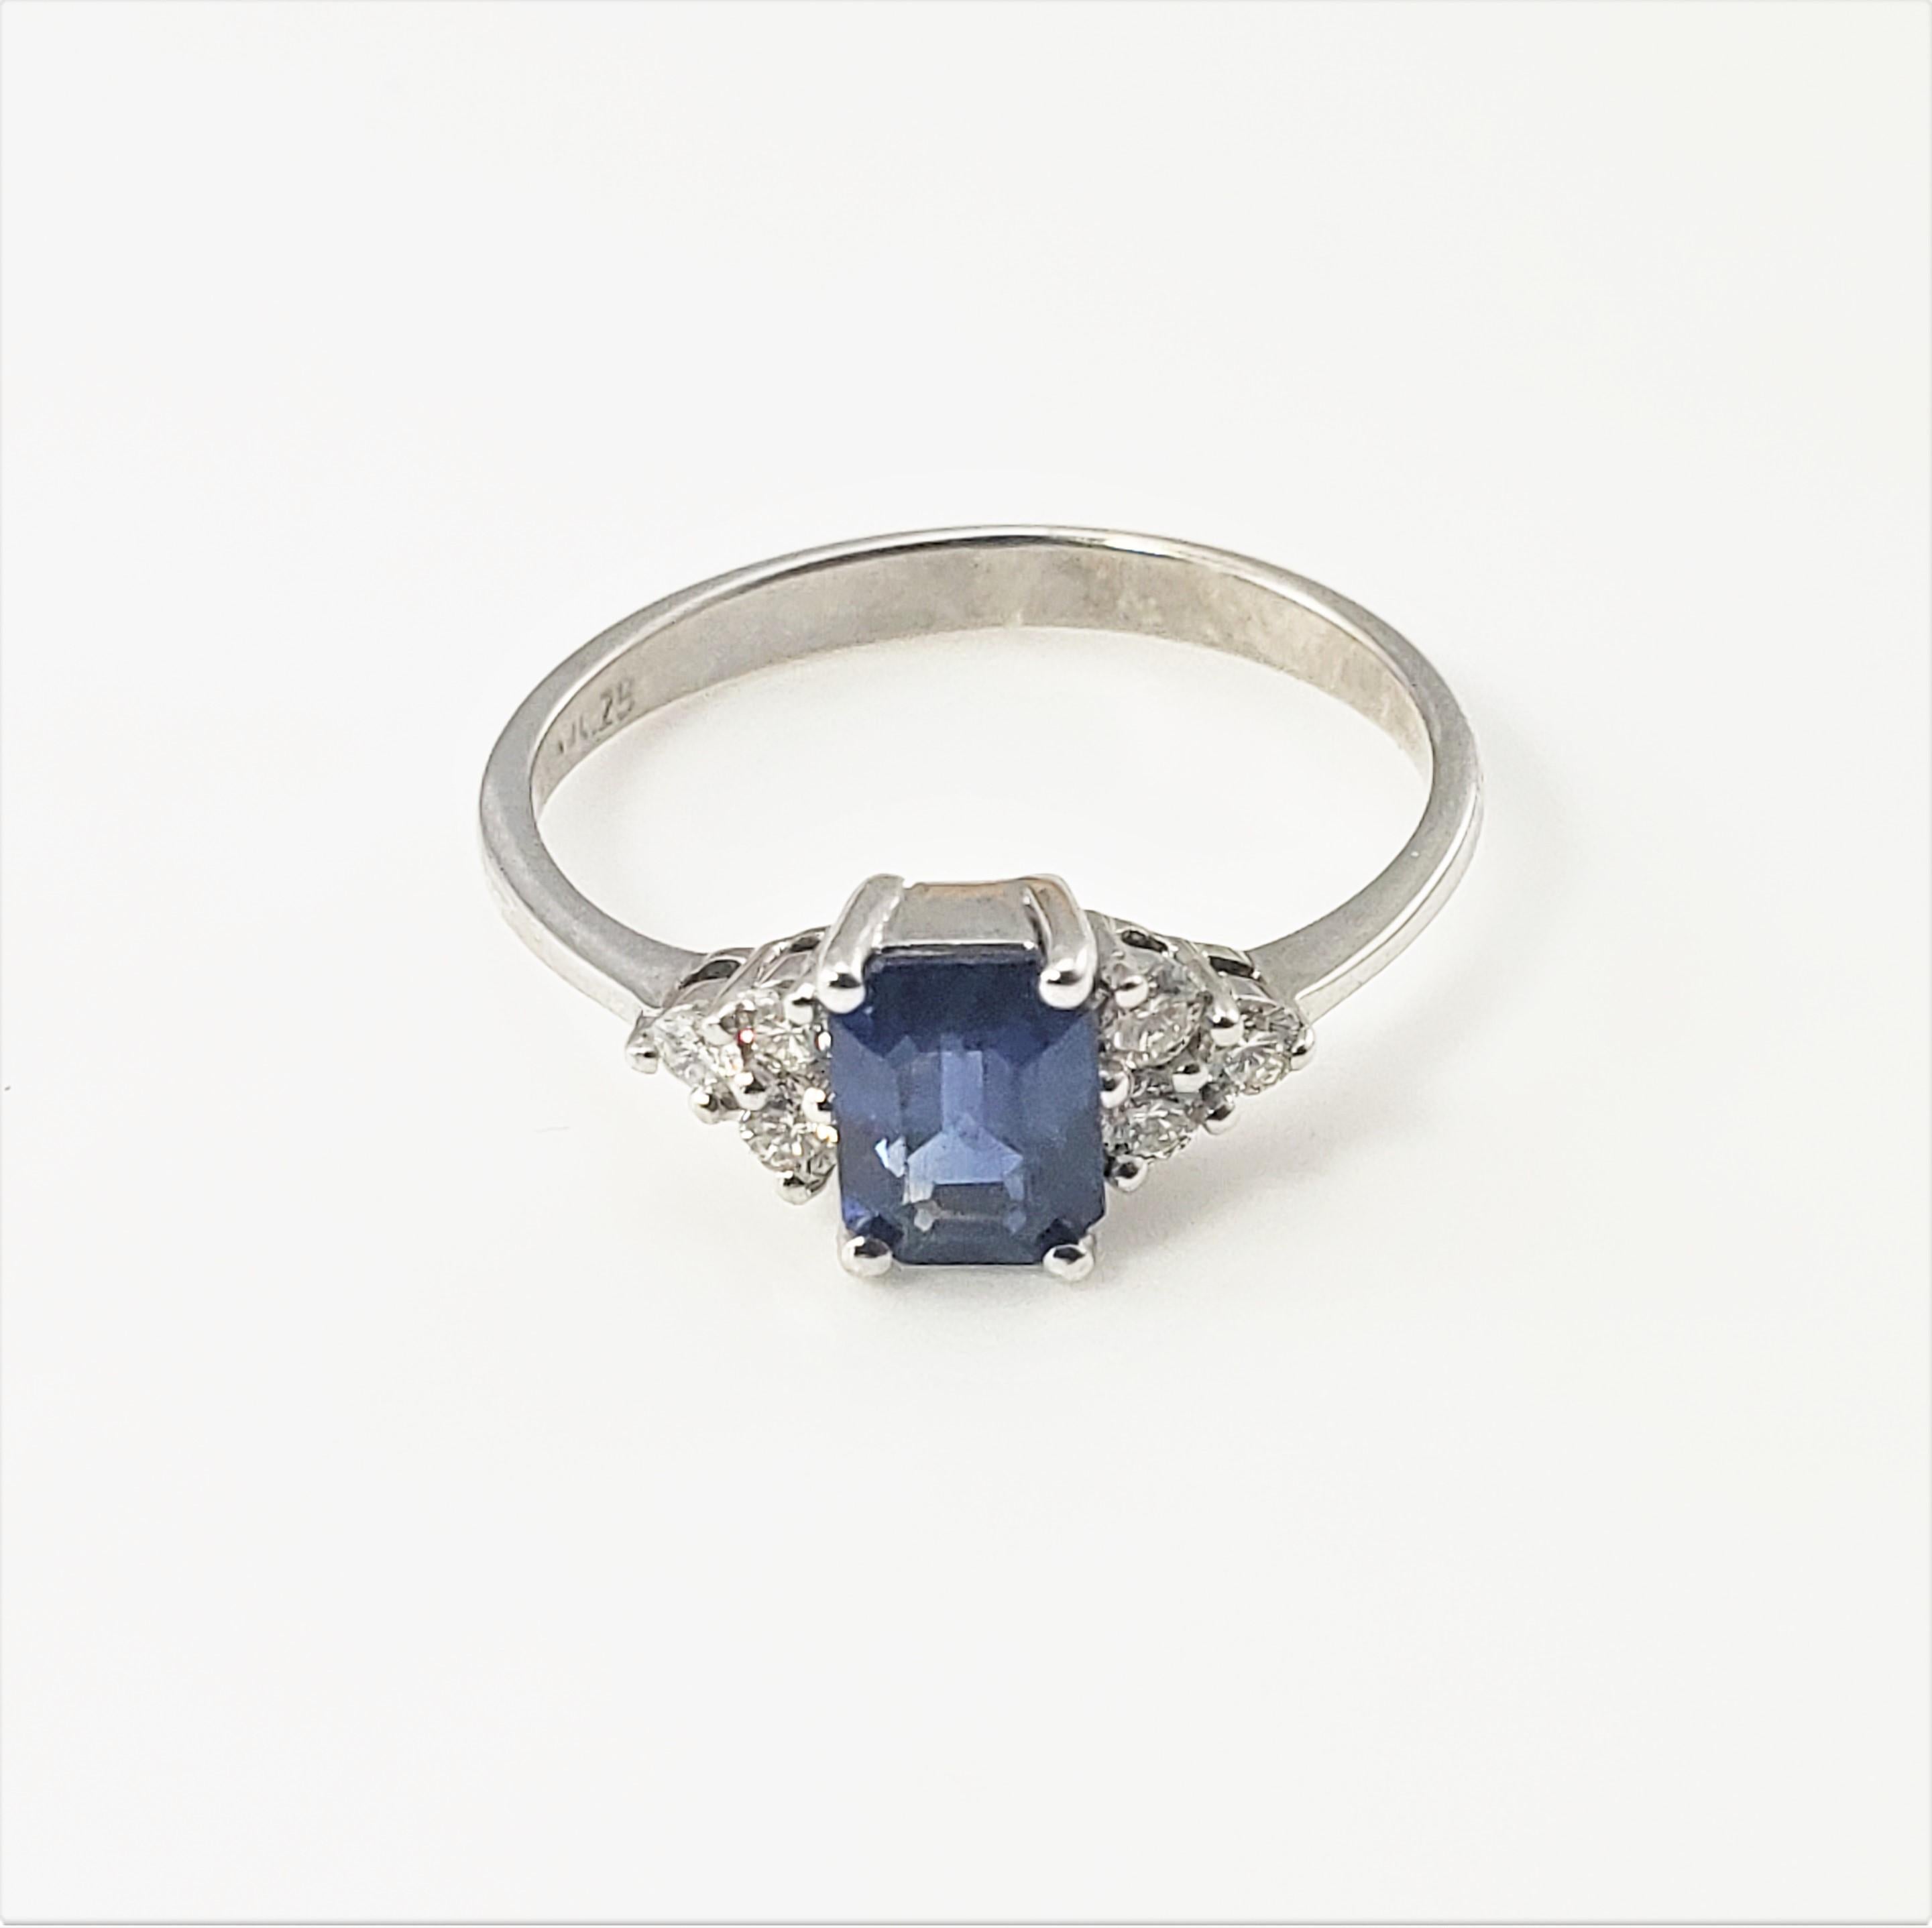 18 Karat White Gold Sapphire and Diamond Ring Size 5.75 GAI Certified-

This stunning ring features one rectangular sapphire (6 mm x 4 mm) and six round brilliant cut diamonds set in classic 18K white gold.  Shank: 2 mm.

Sapphire weight:  .91